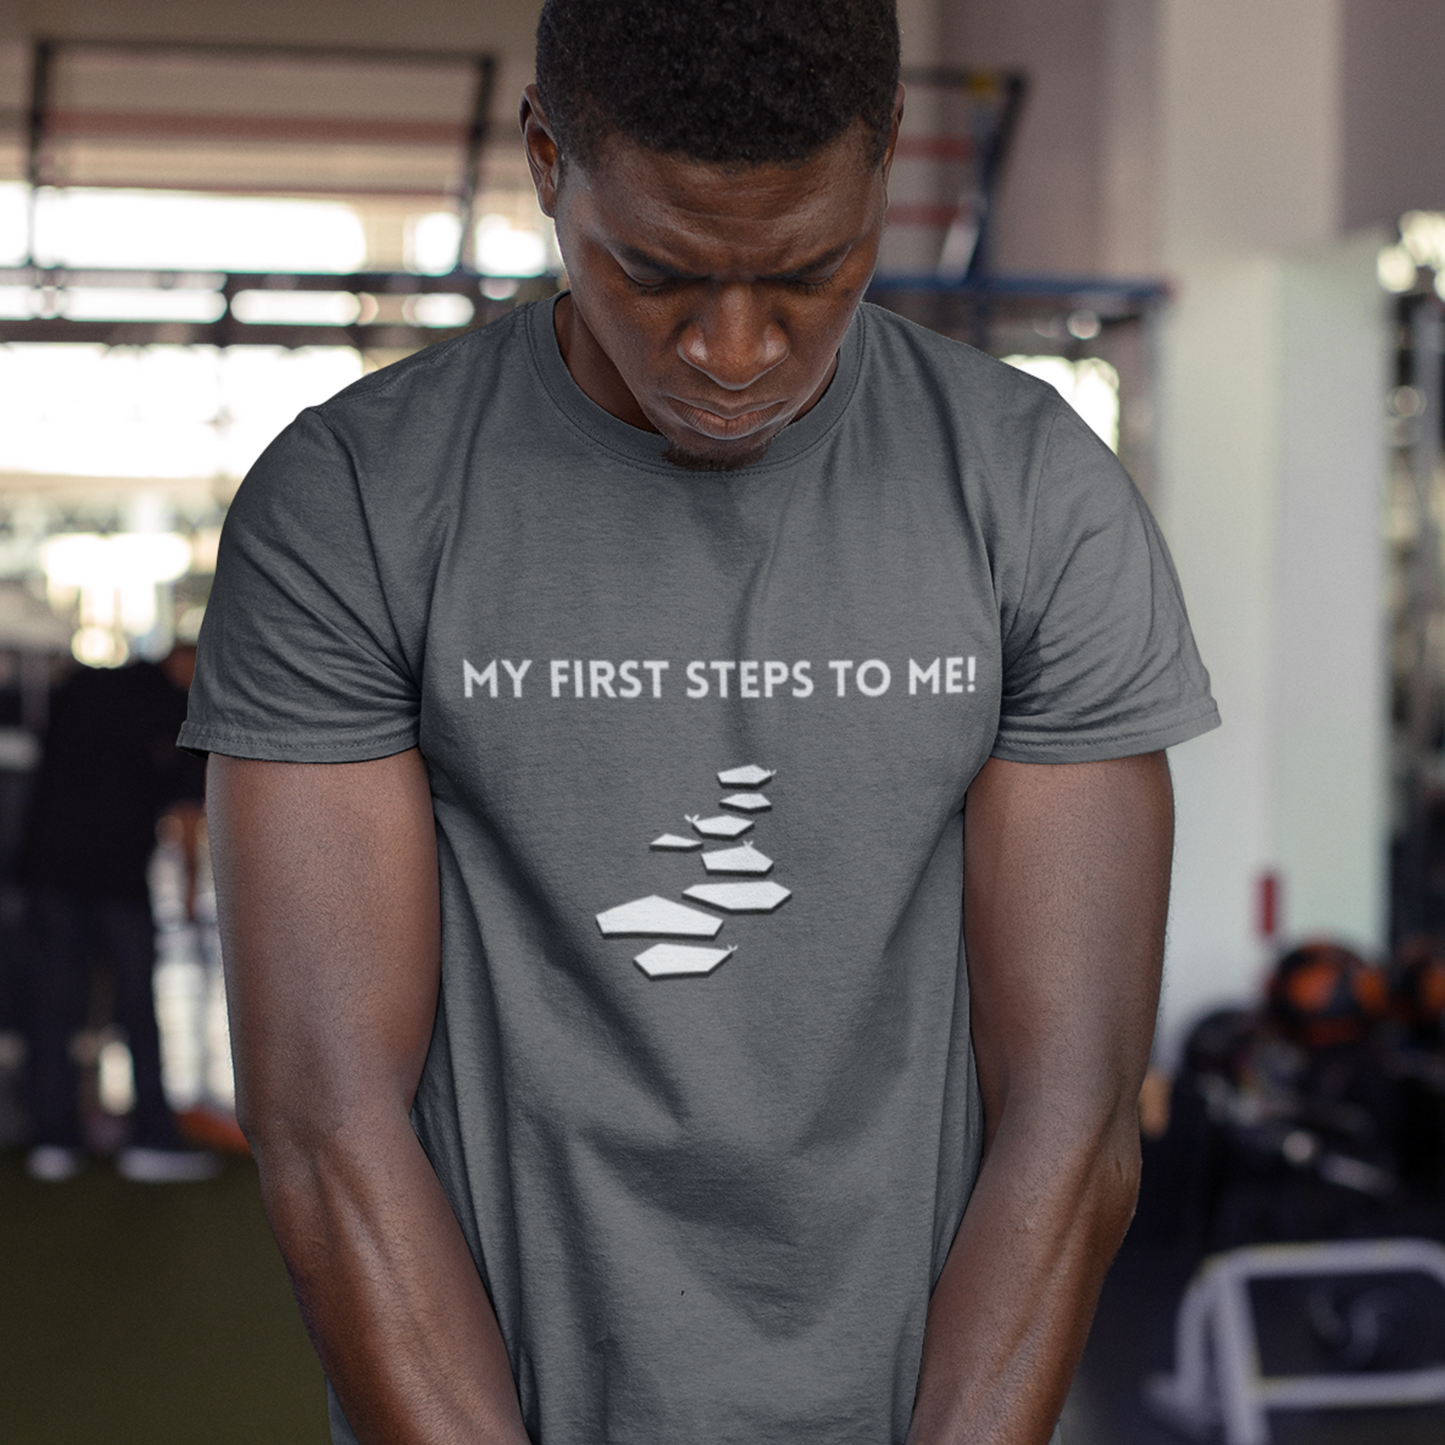 My first steps to me t shirt inspirational words on a tshirt t shirt gift to encourage self affirming words on a t shirt